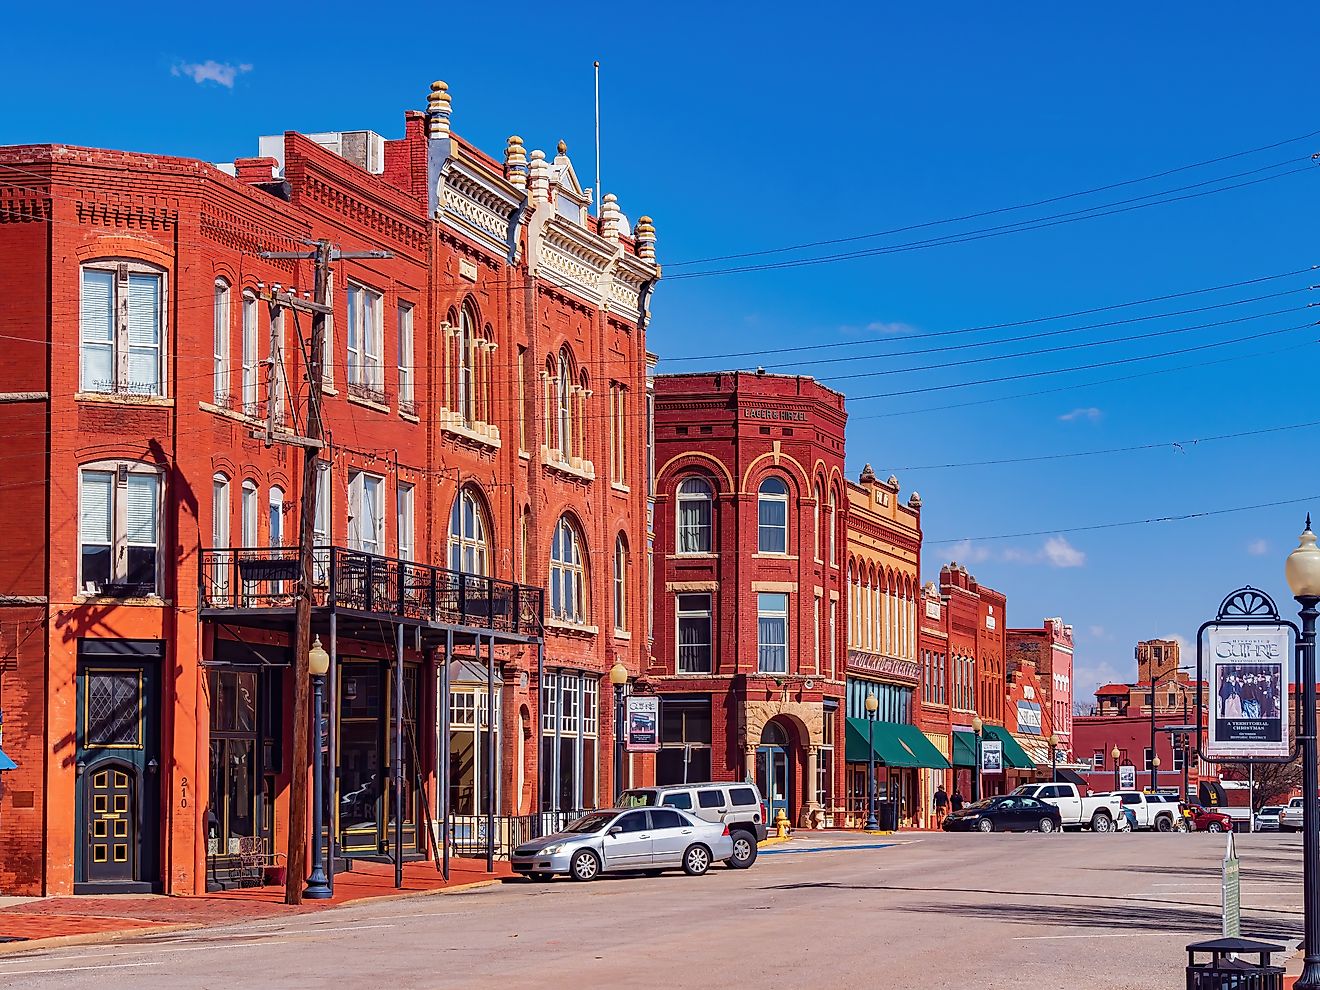 Sunny exterior view of the Guthrie, Oklahoma. Editorial credit: Kit Leong / Shutterstock.com